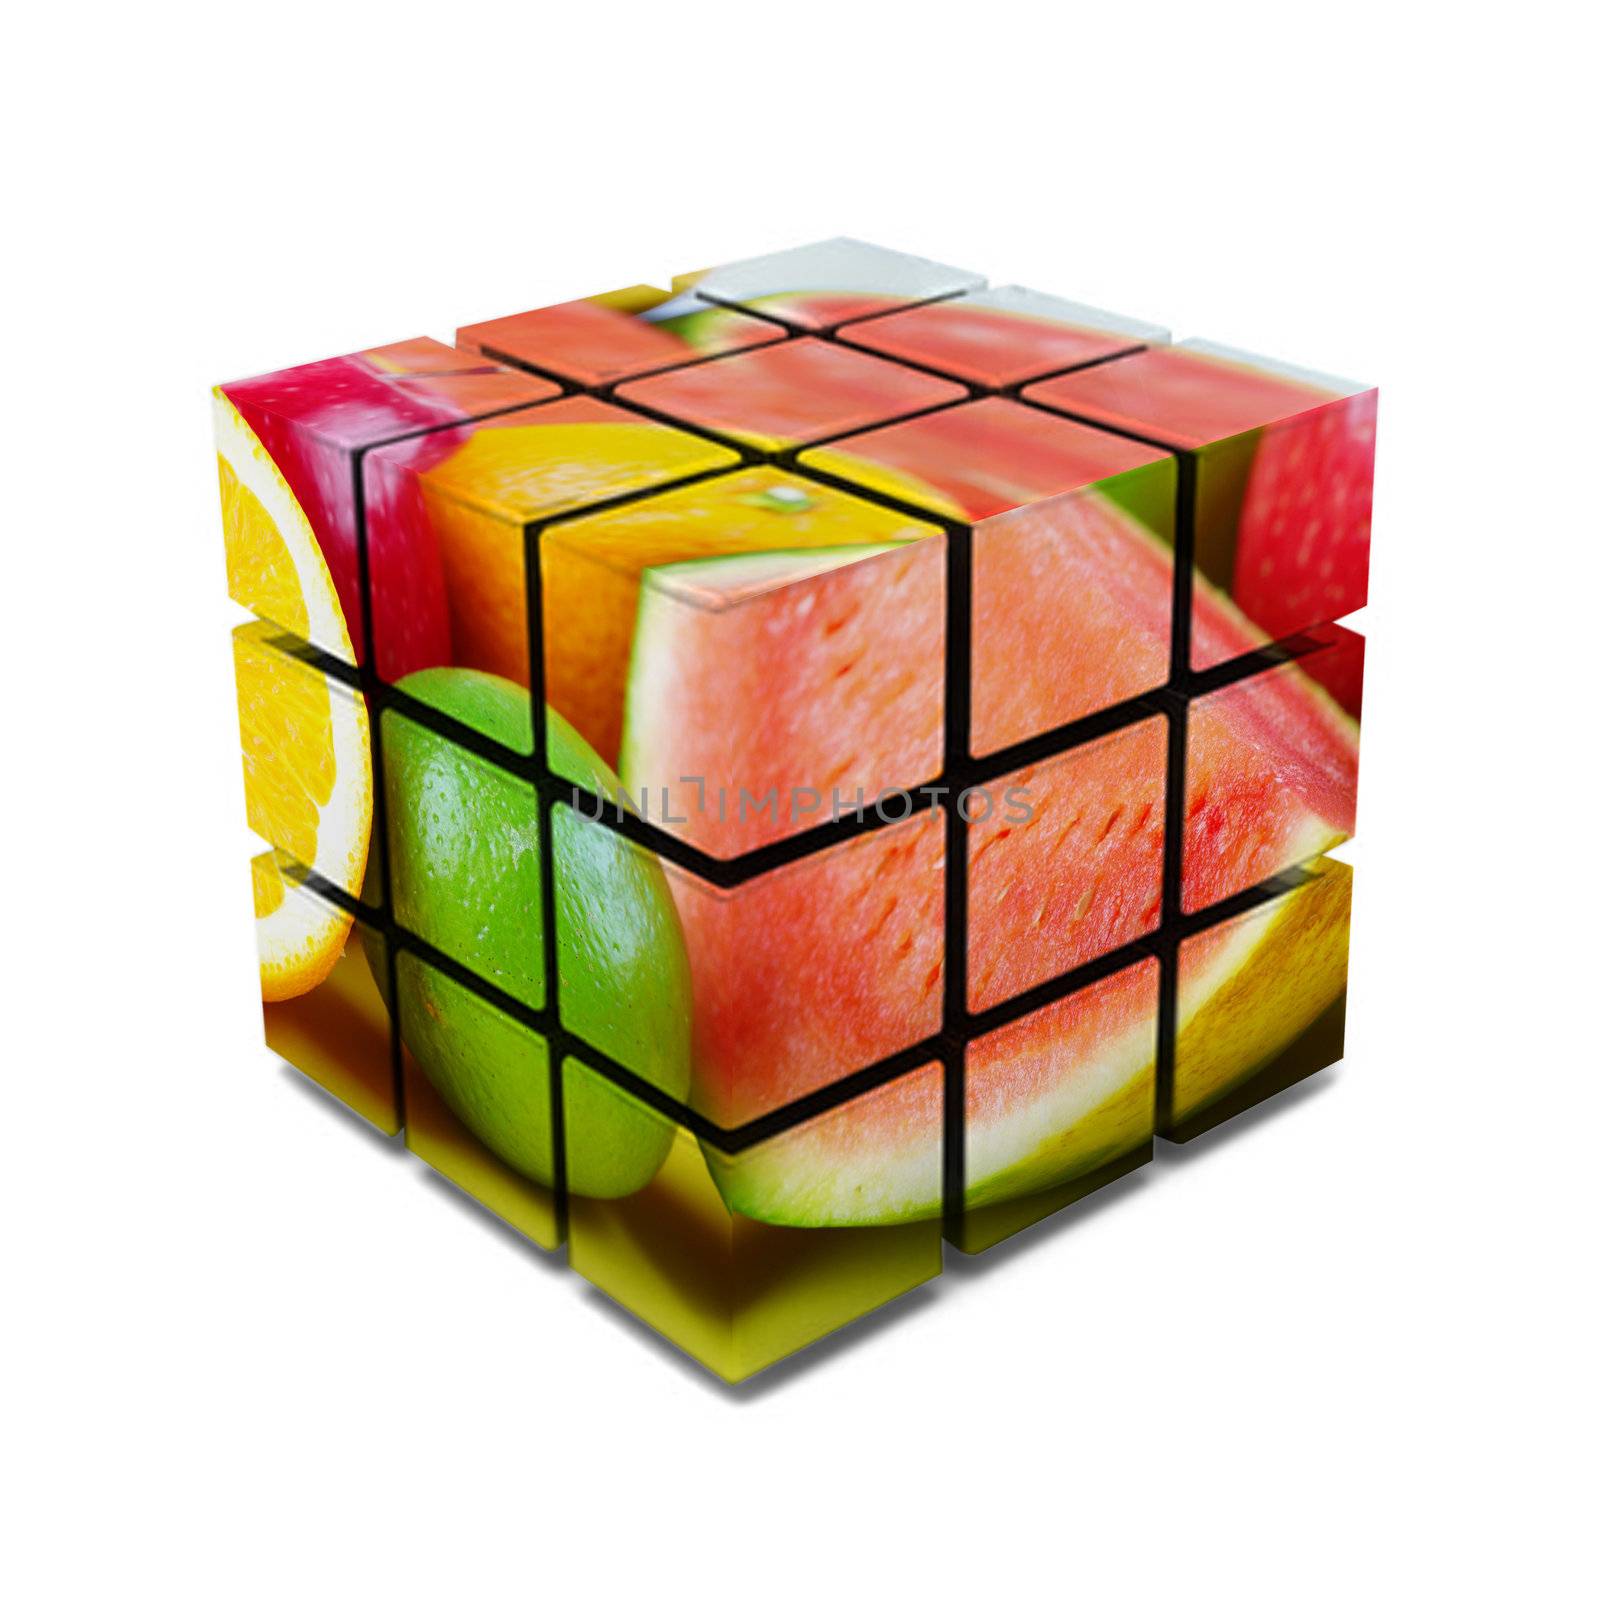 Cube with fruit. Abstract by petrkurgan